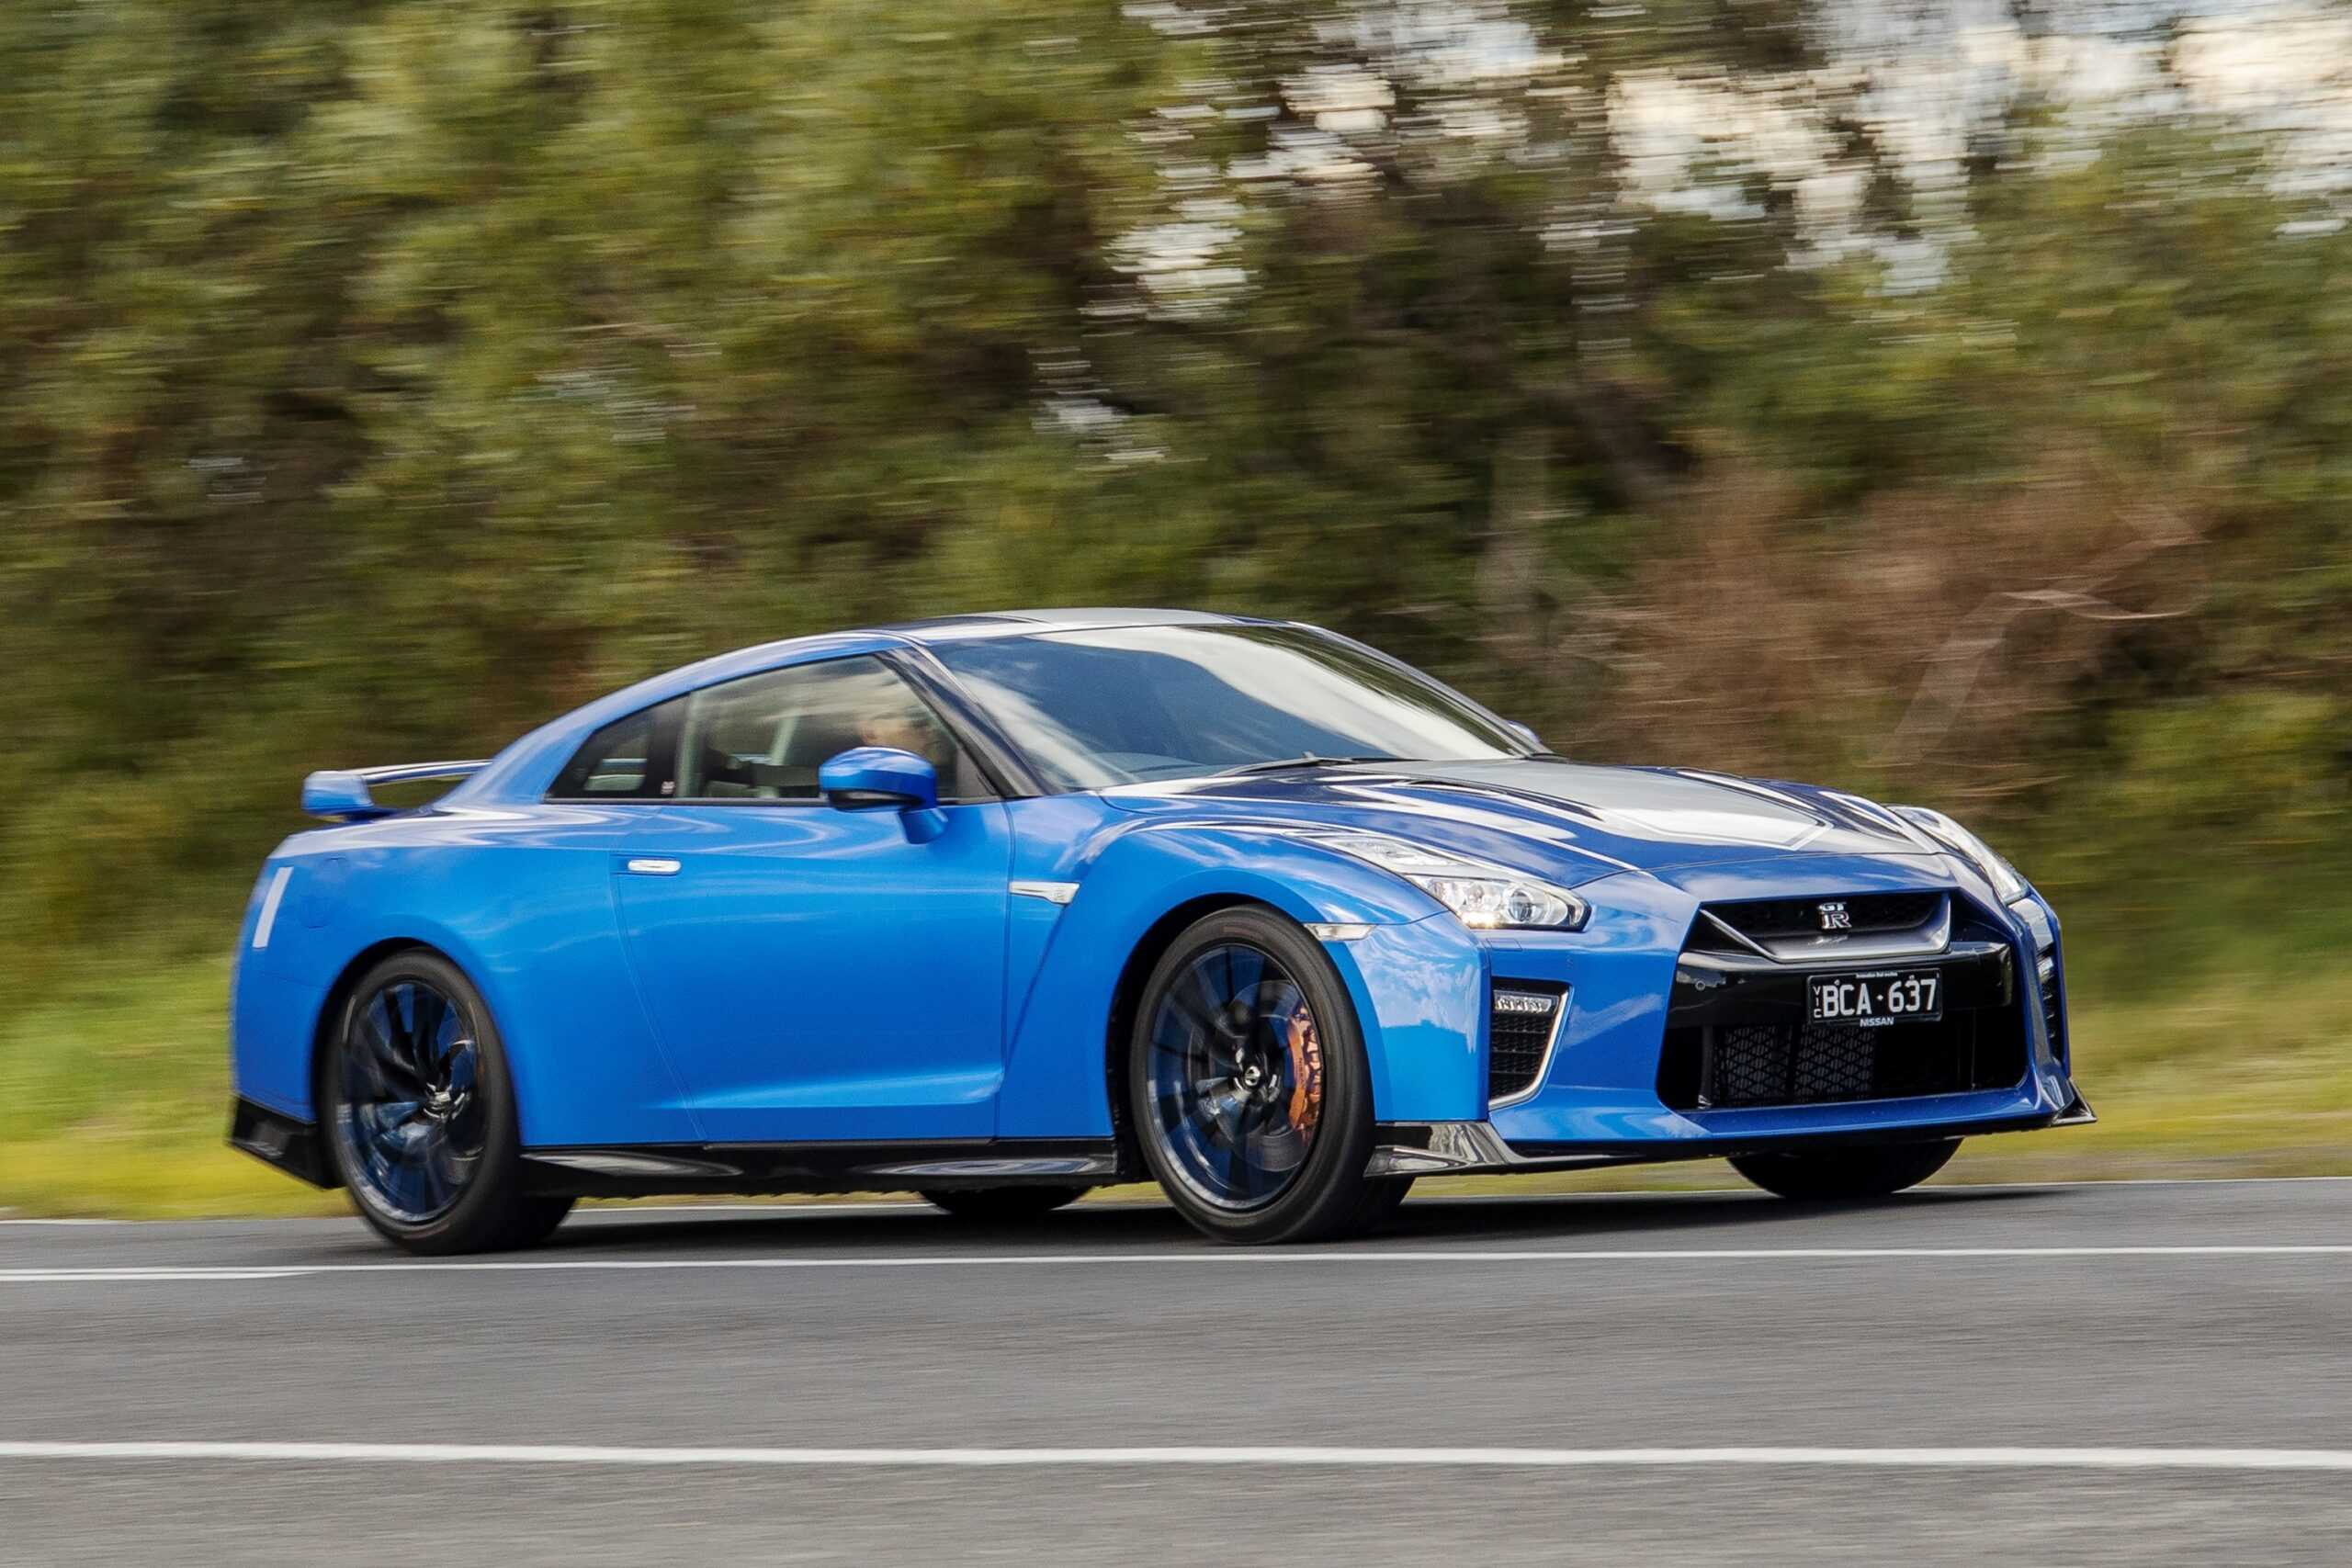 Nissan GT-R 2019 featured